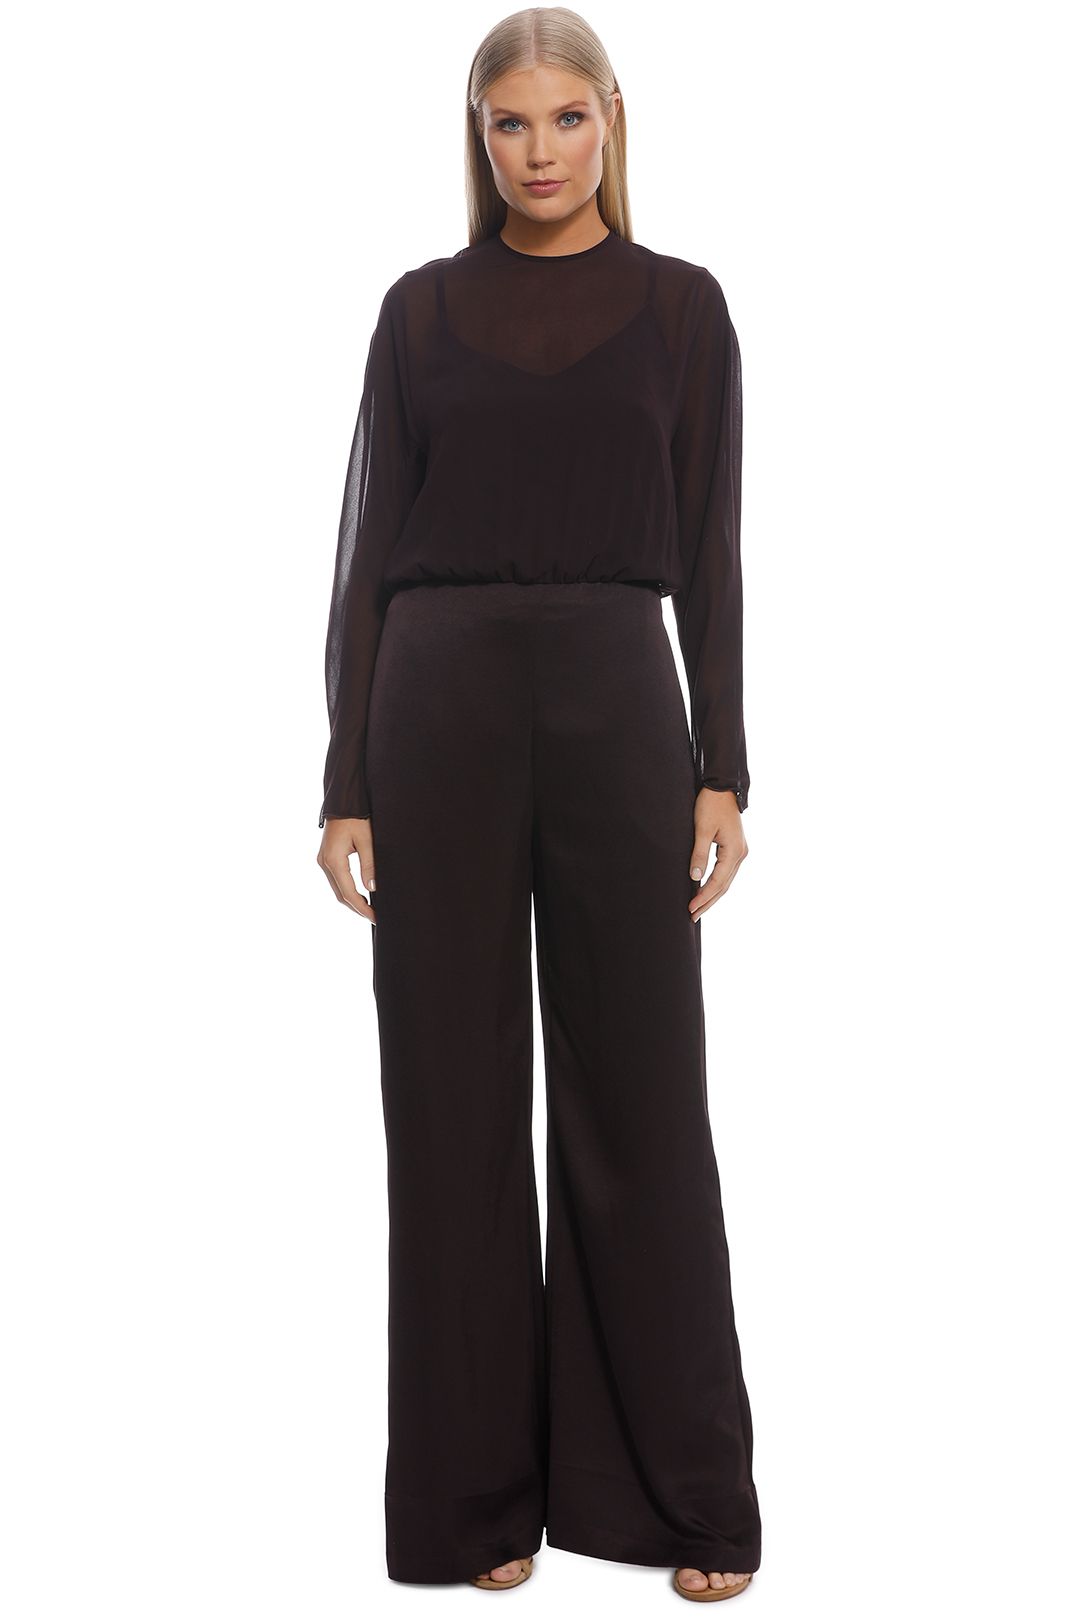 Camilla and Marc - Henderson Jumpsuit - Black - Front